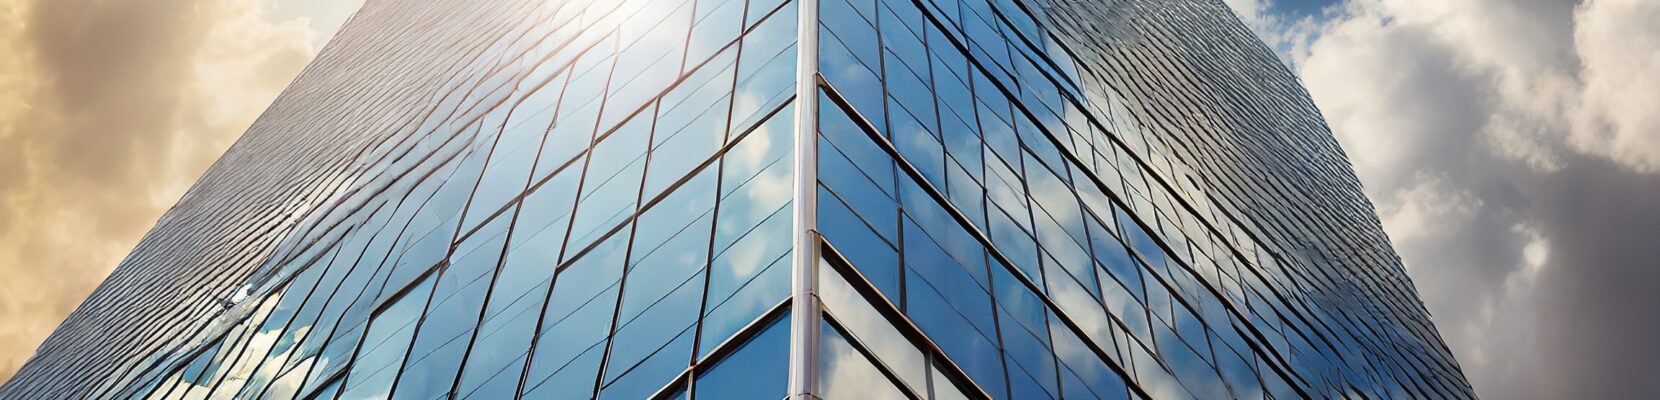 close up image of skyscraper with reflection of clouds